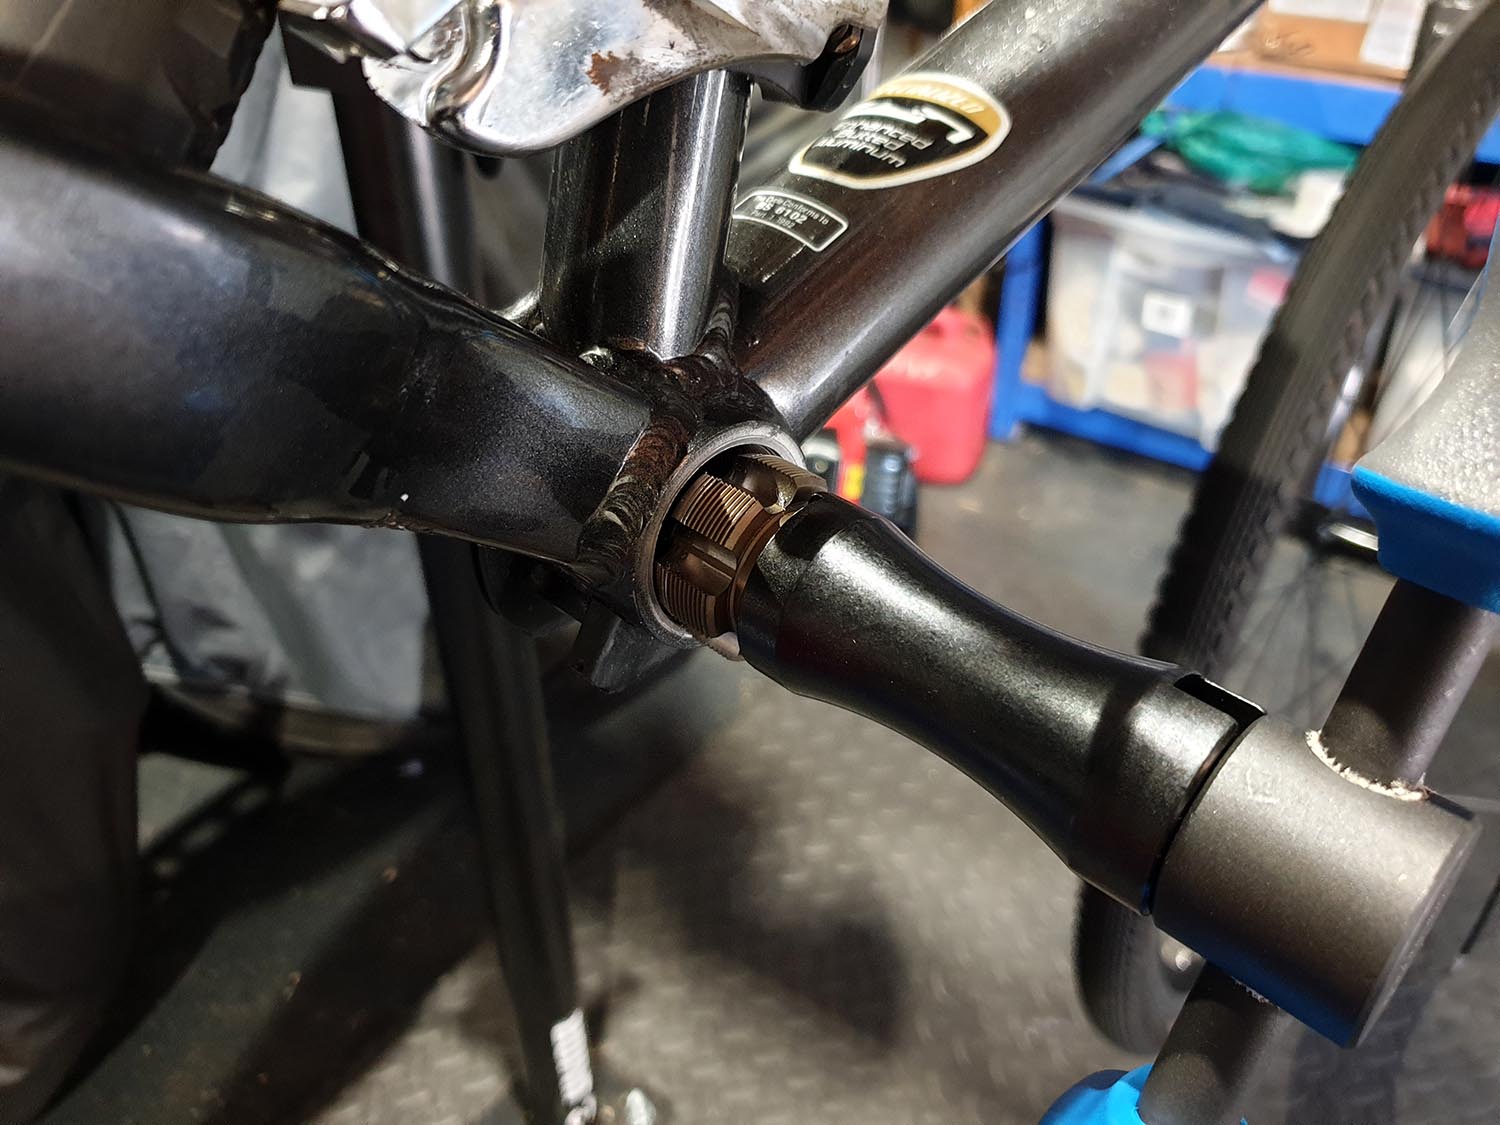 Bottom bracket needed replacing. Thread cleaned and serviced before fitting a new cassette bottom bracket from Ipswich.